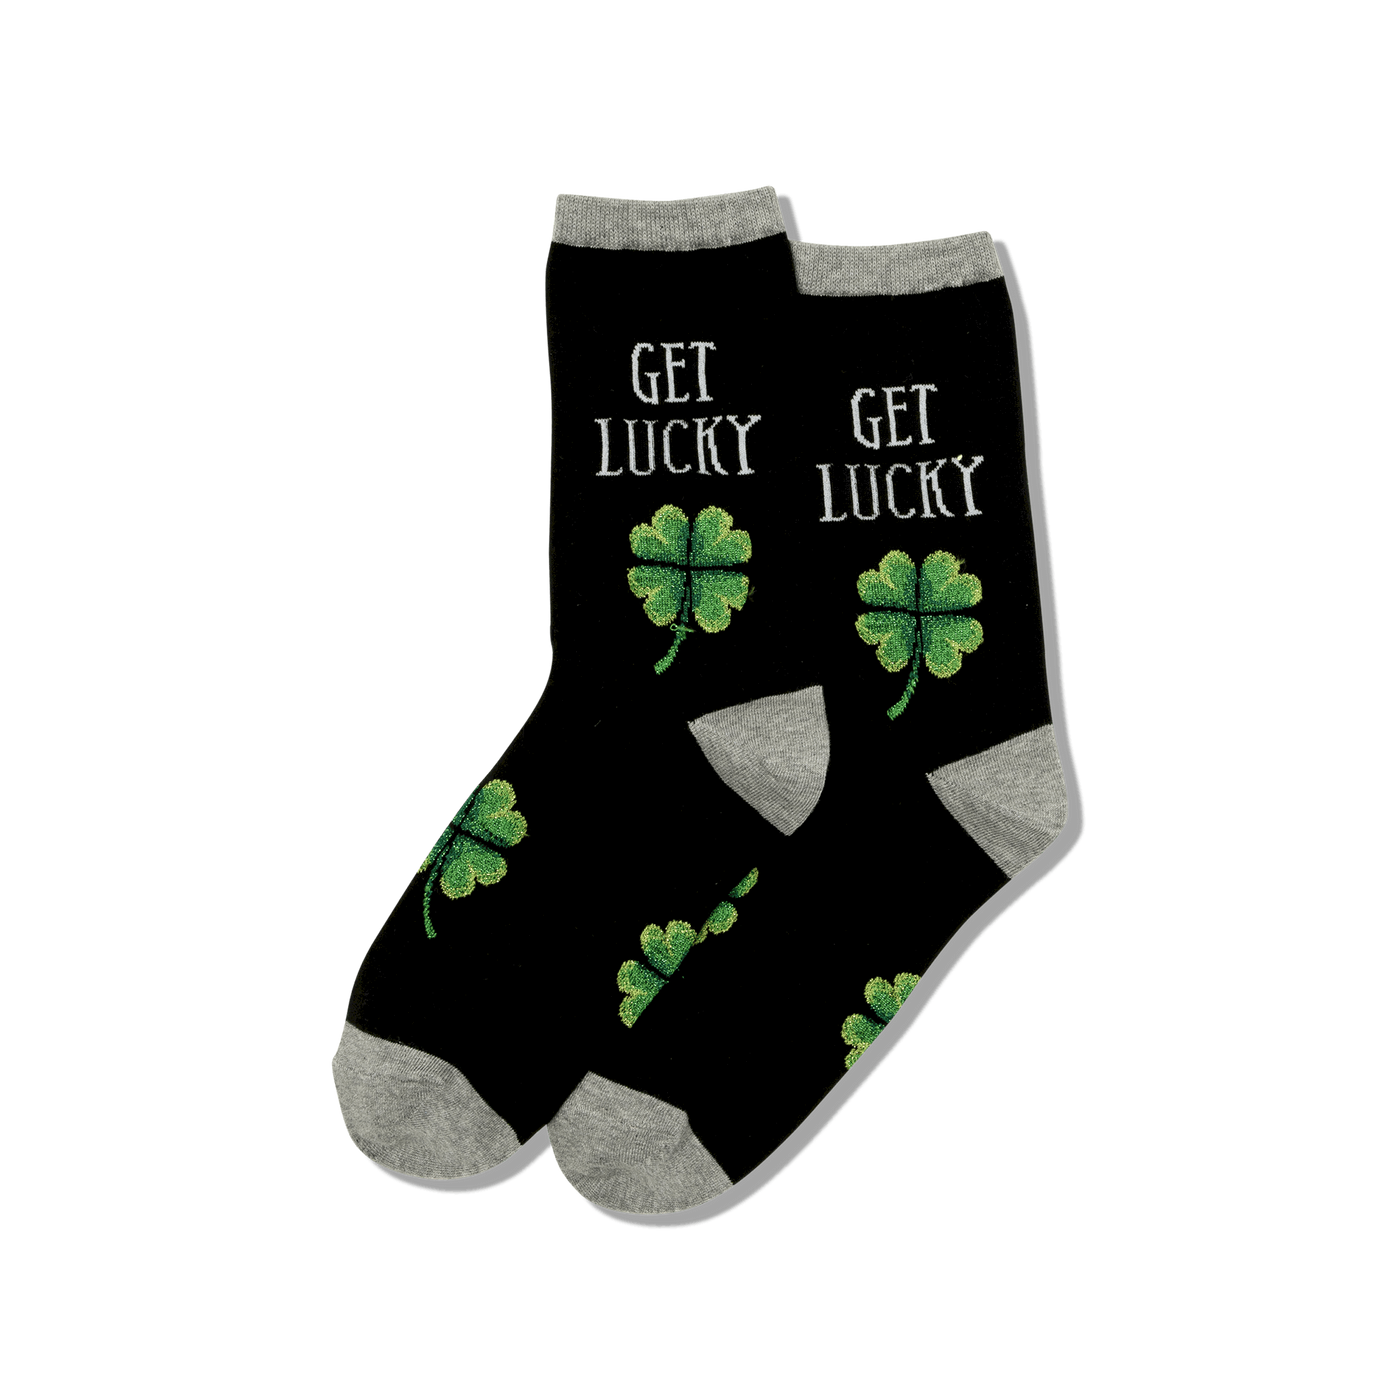 "Get Lucky" Cotton Crew Socks by Hot Sox